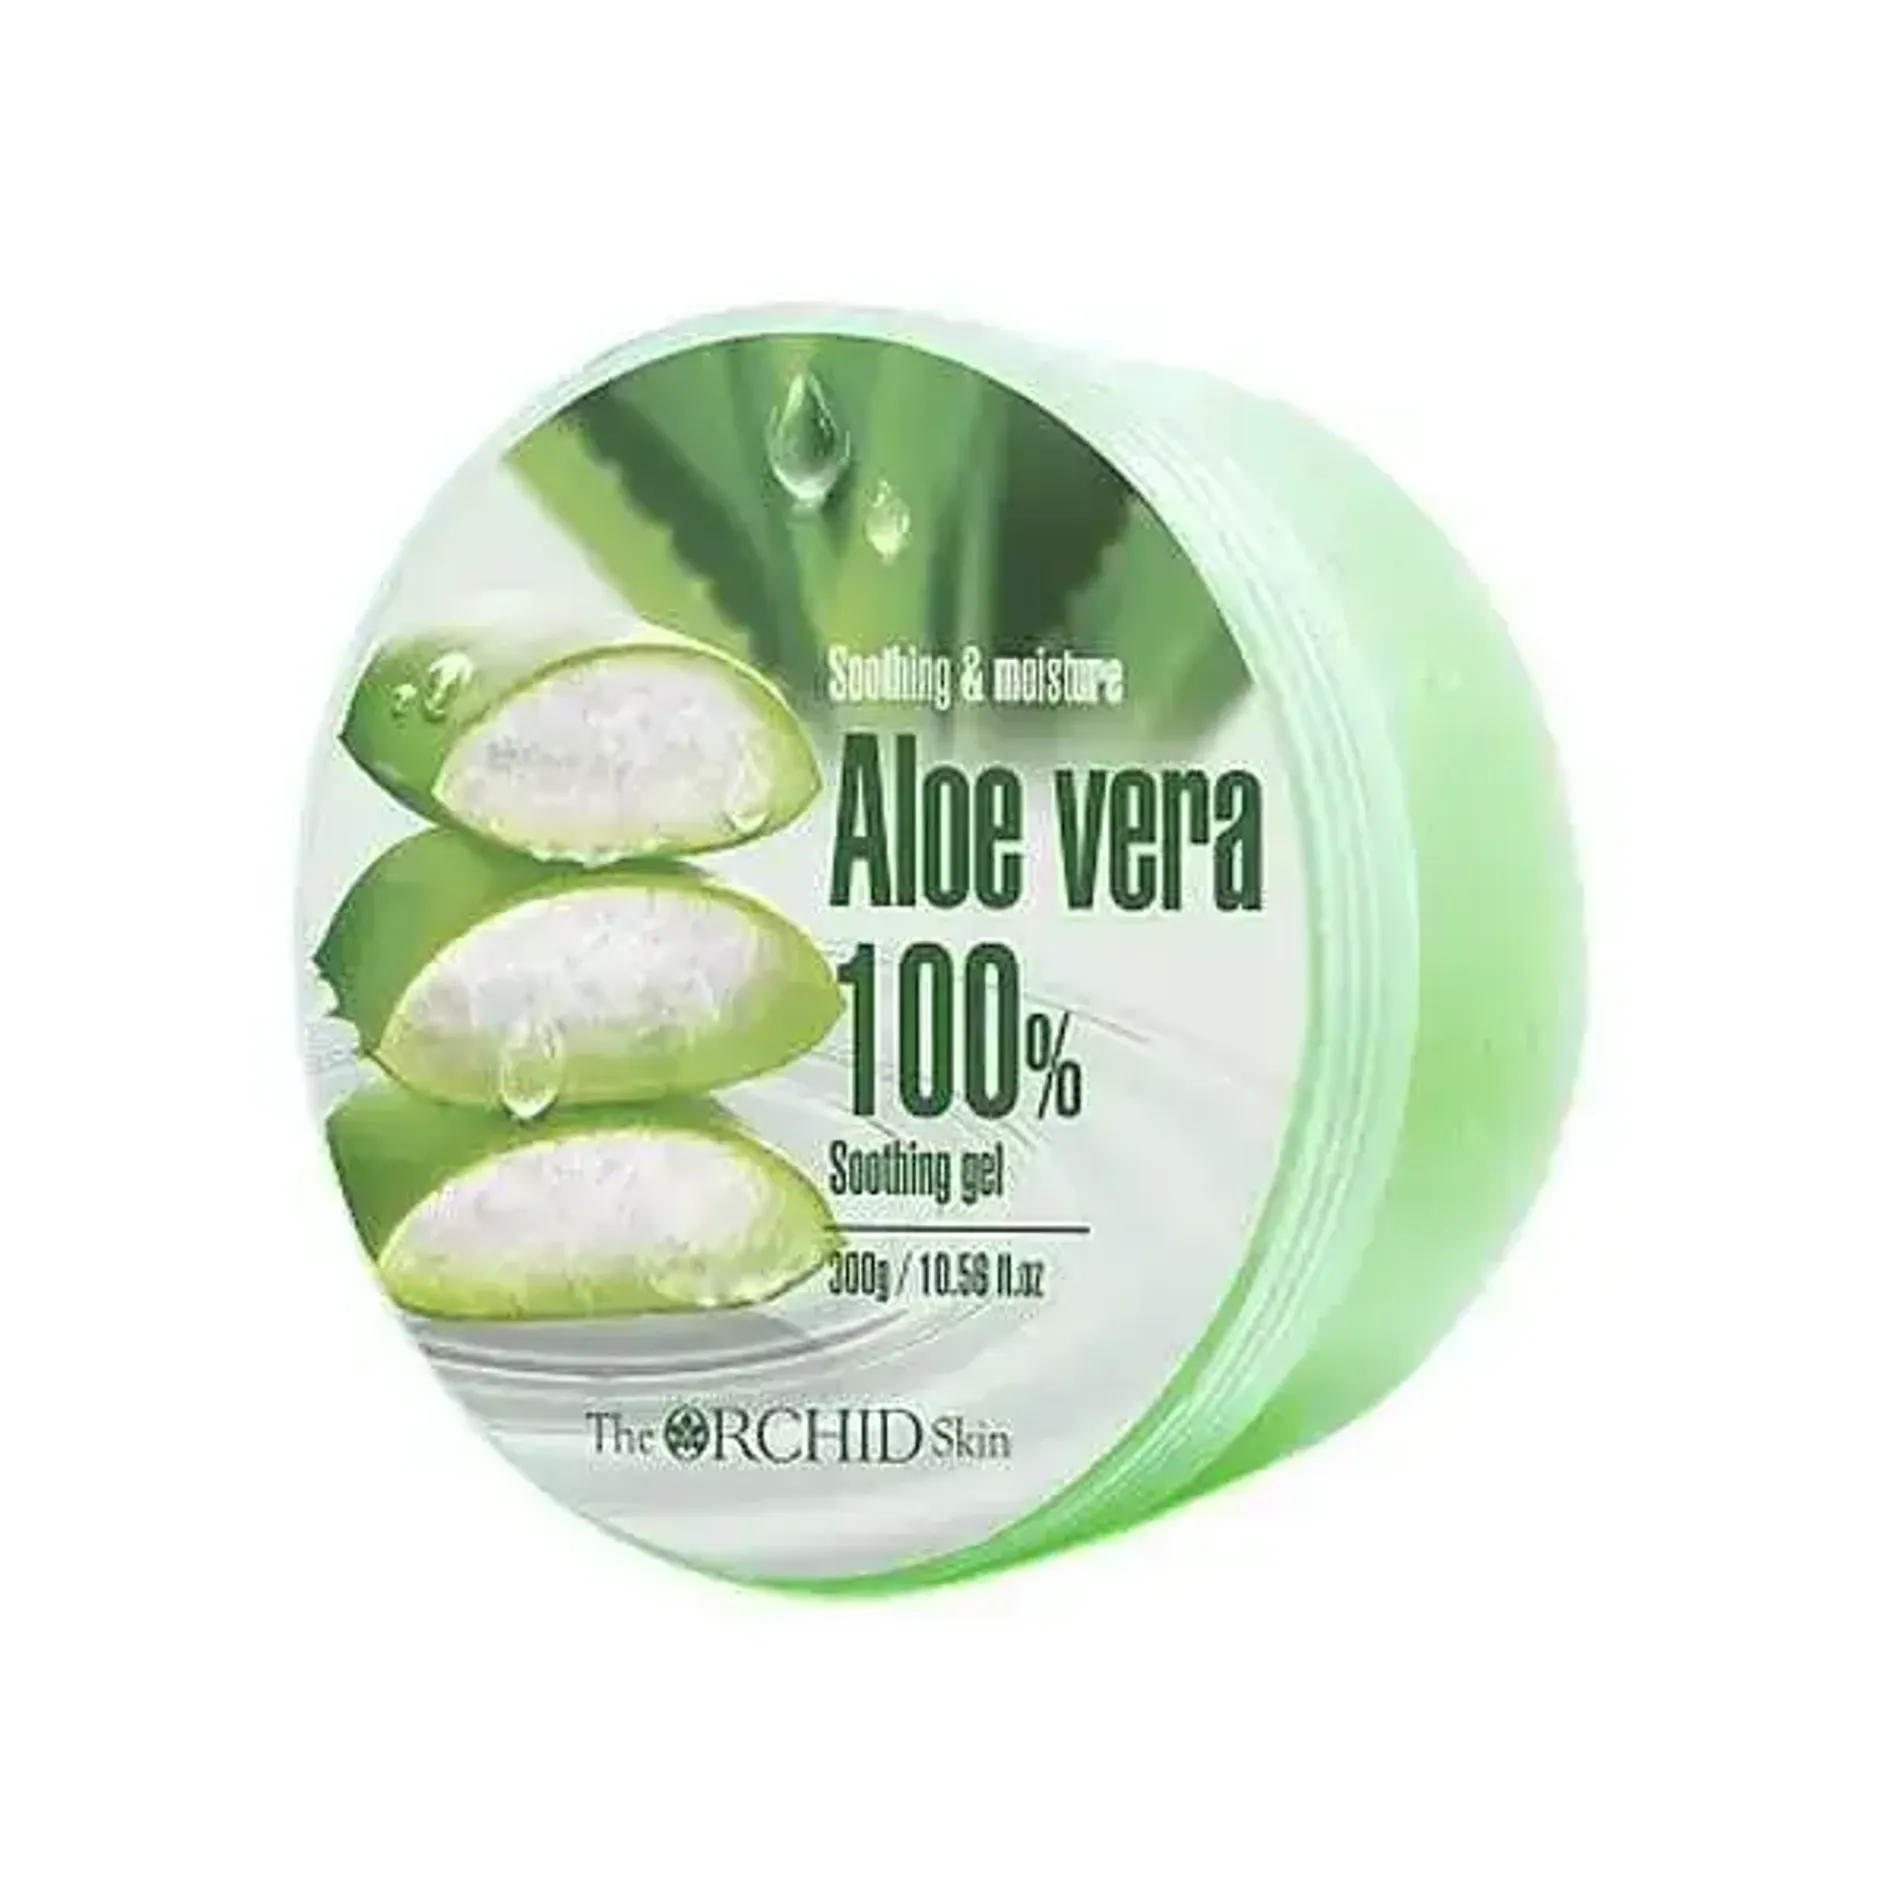 san-pham-duong-the-the-orchid-skin-aloe-soothing-gel-1